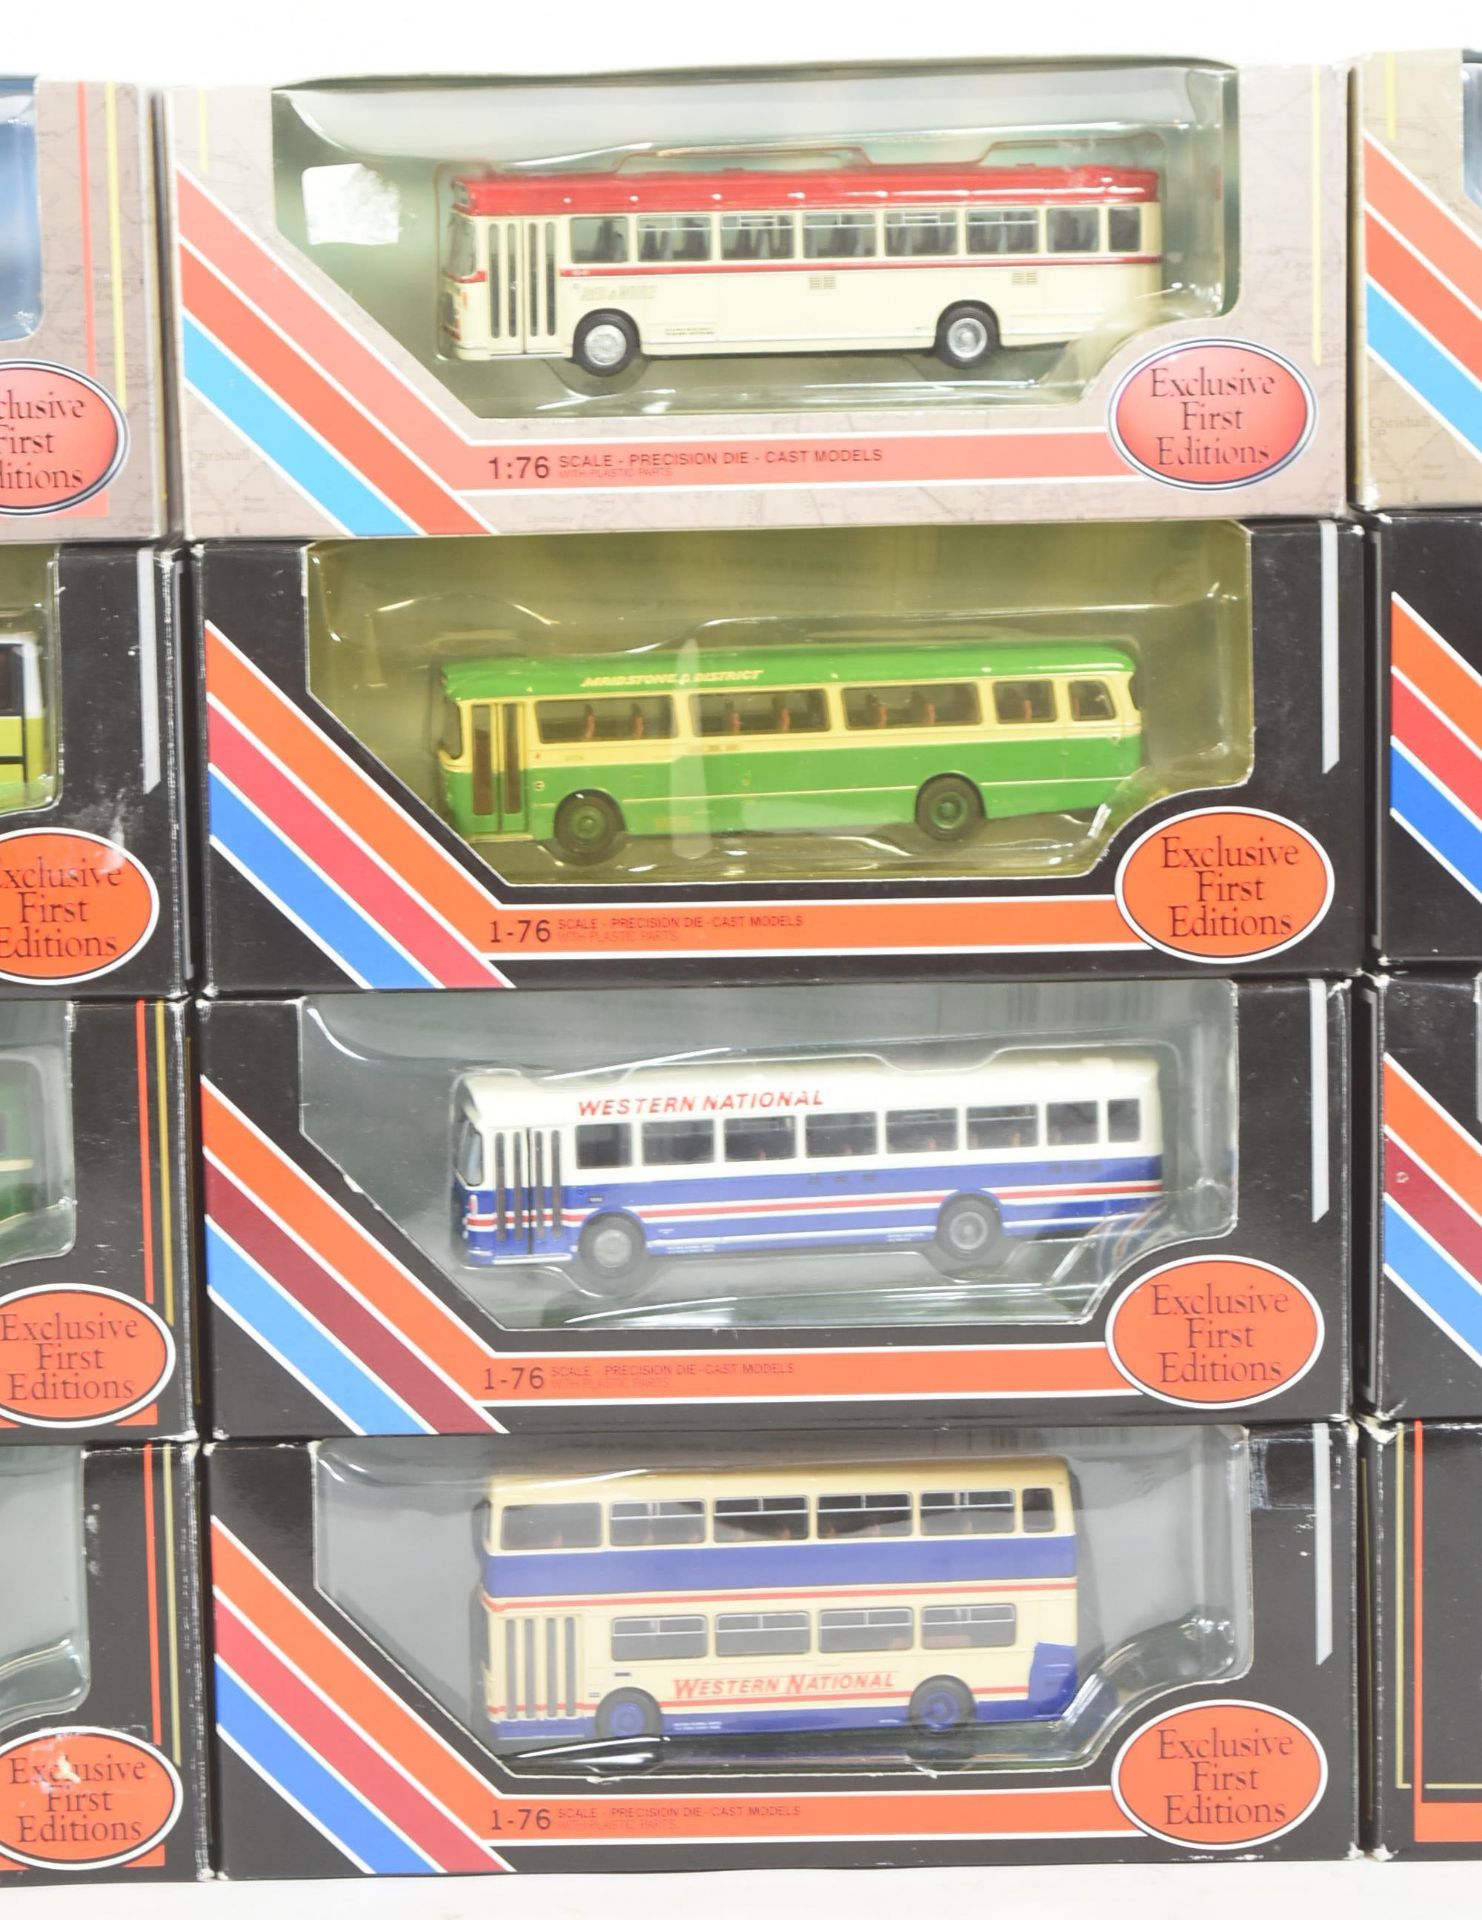 DIECAST - EFE EXCLUSIVE FIRST EDITIONS DIECAST MODEL BUSES - Image 4 of 5